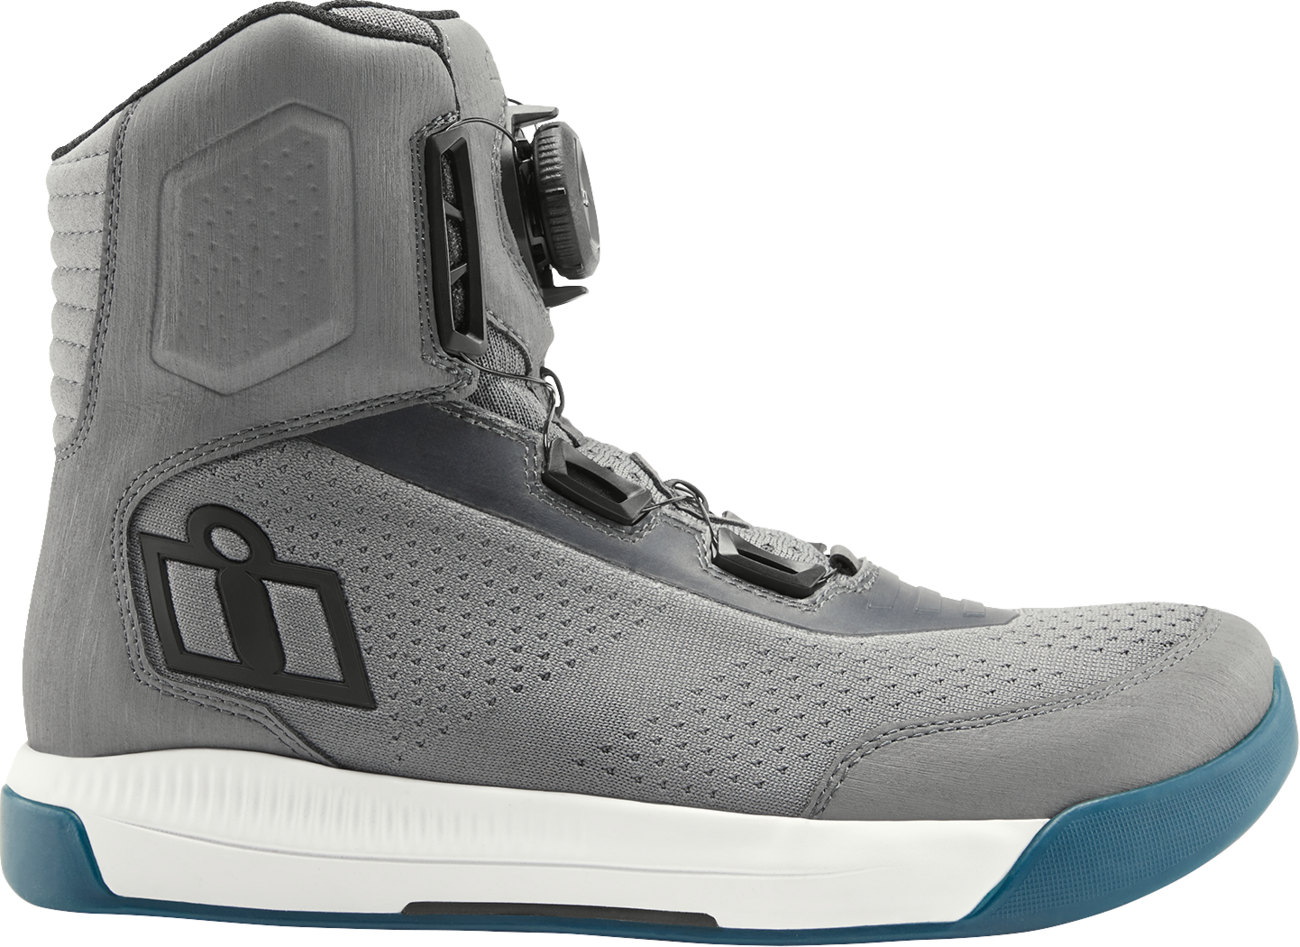 ICON Overlord™ Vented CE Boots - Gray - Size 8.5 3403-1270